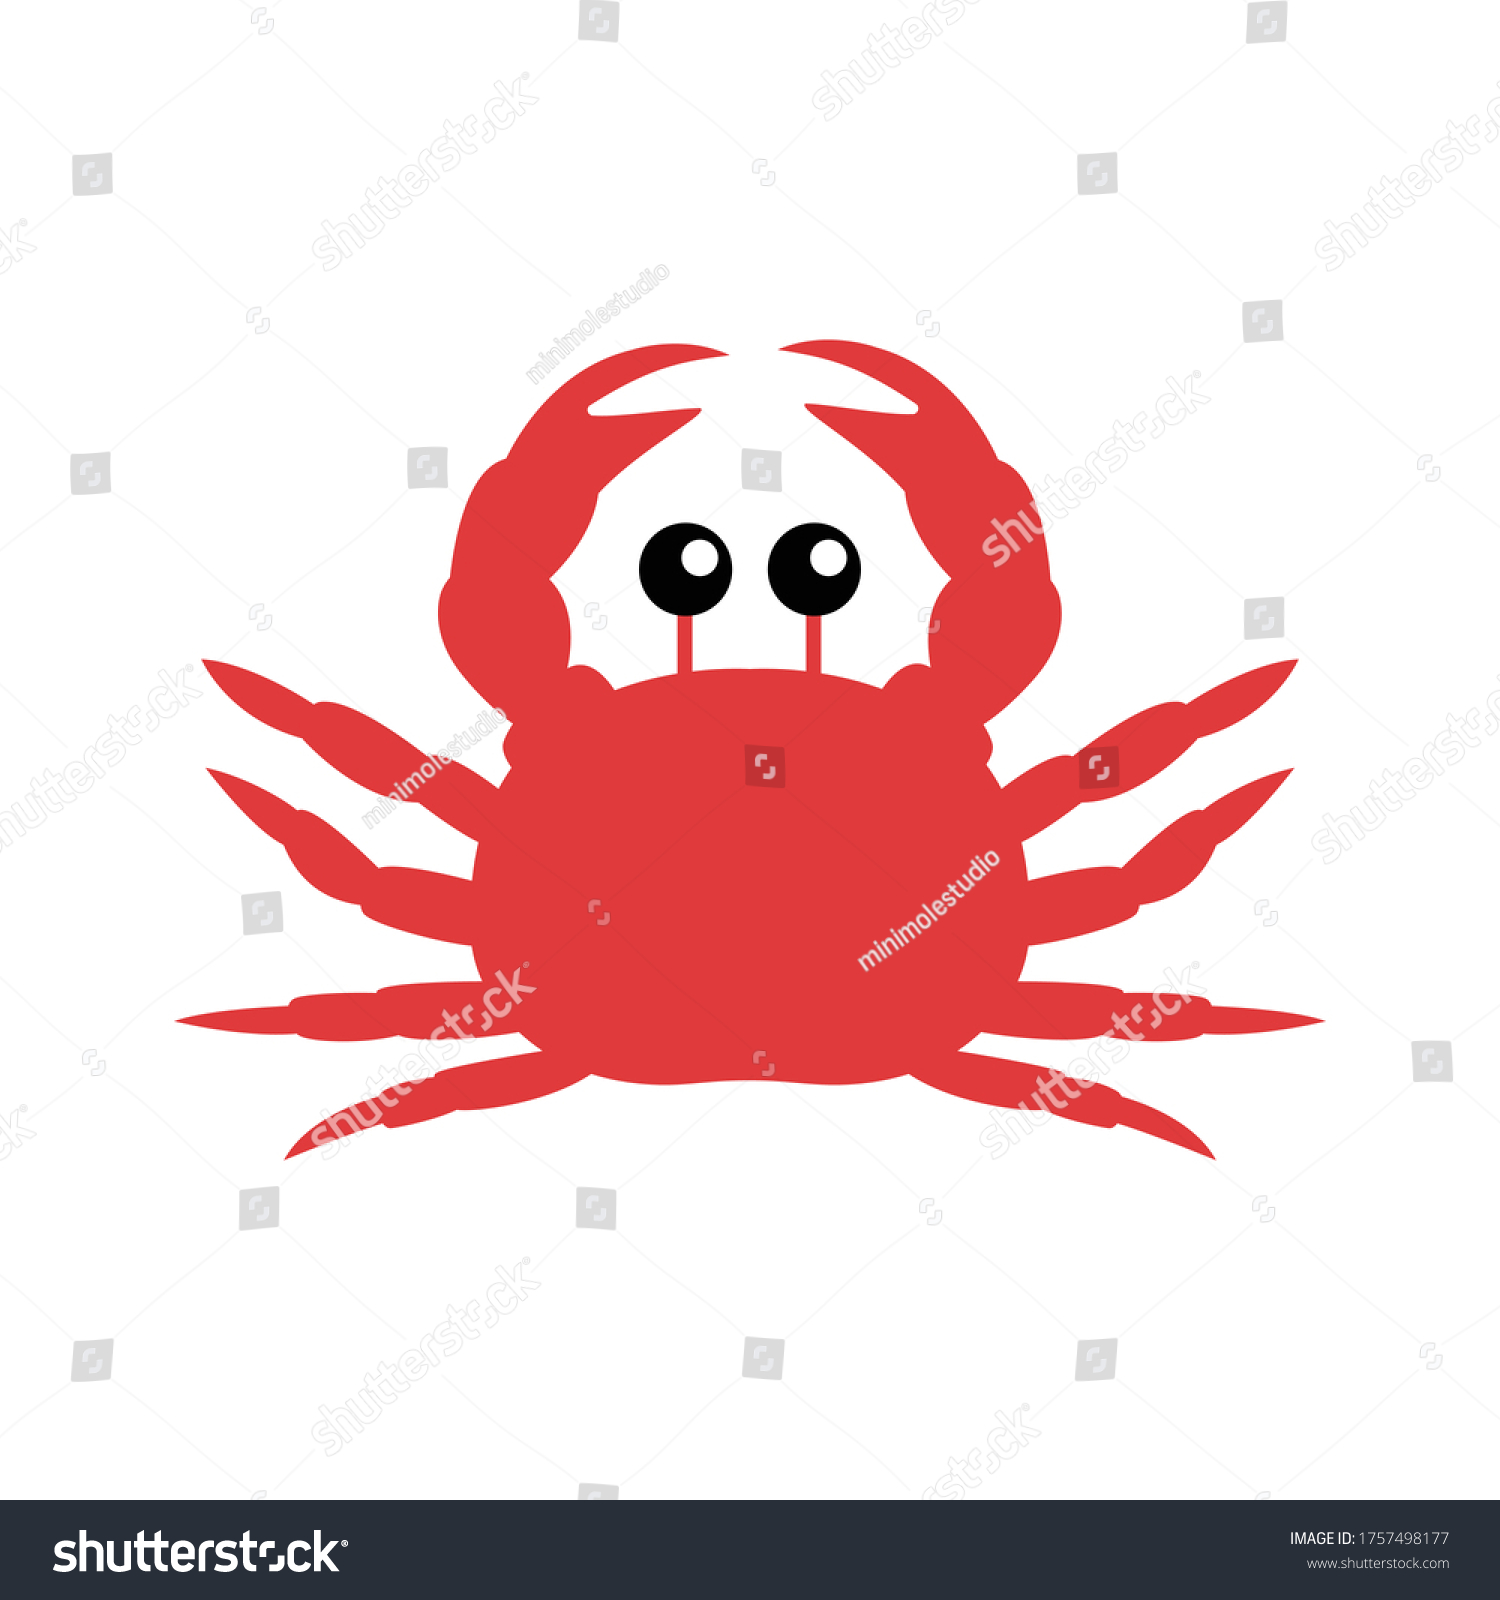 SVG of Vector illustration of a red crab with a cute face. Simple, flat kawaii style. svg